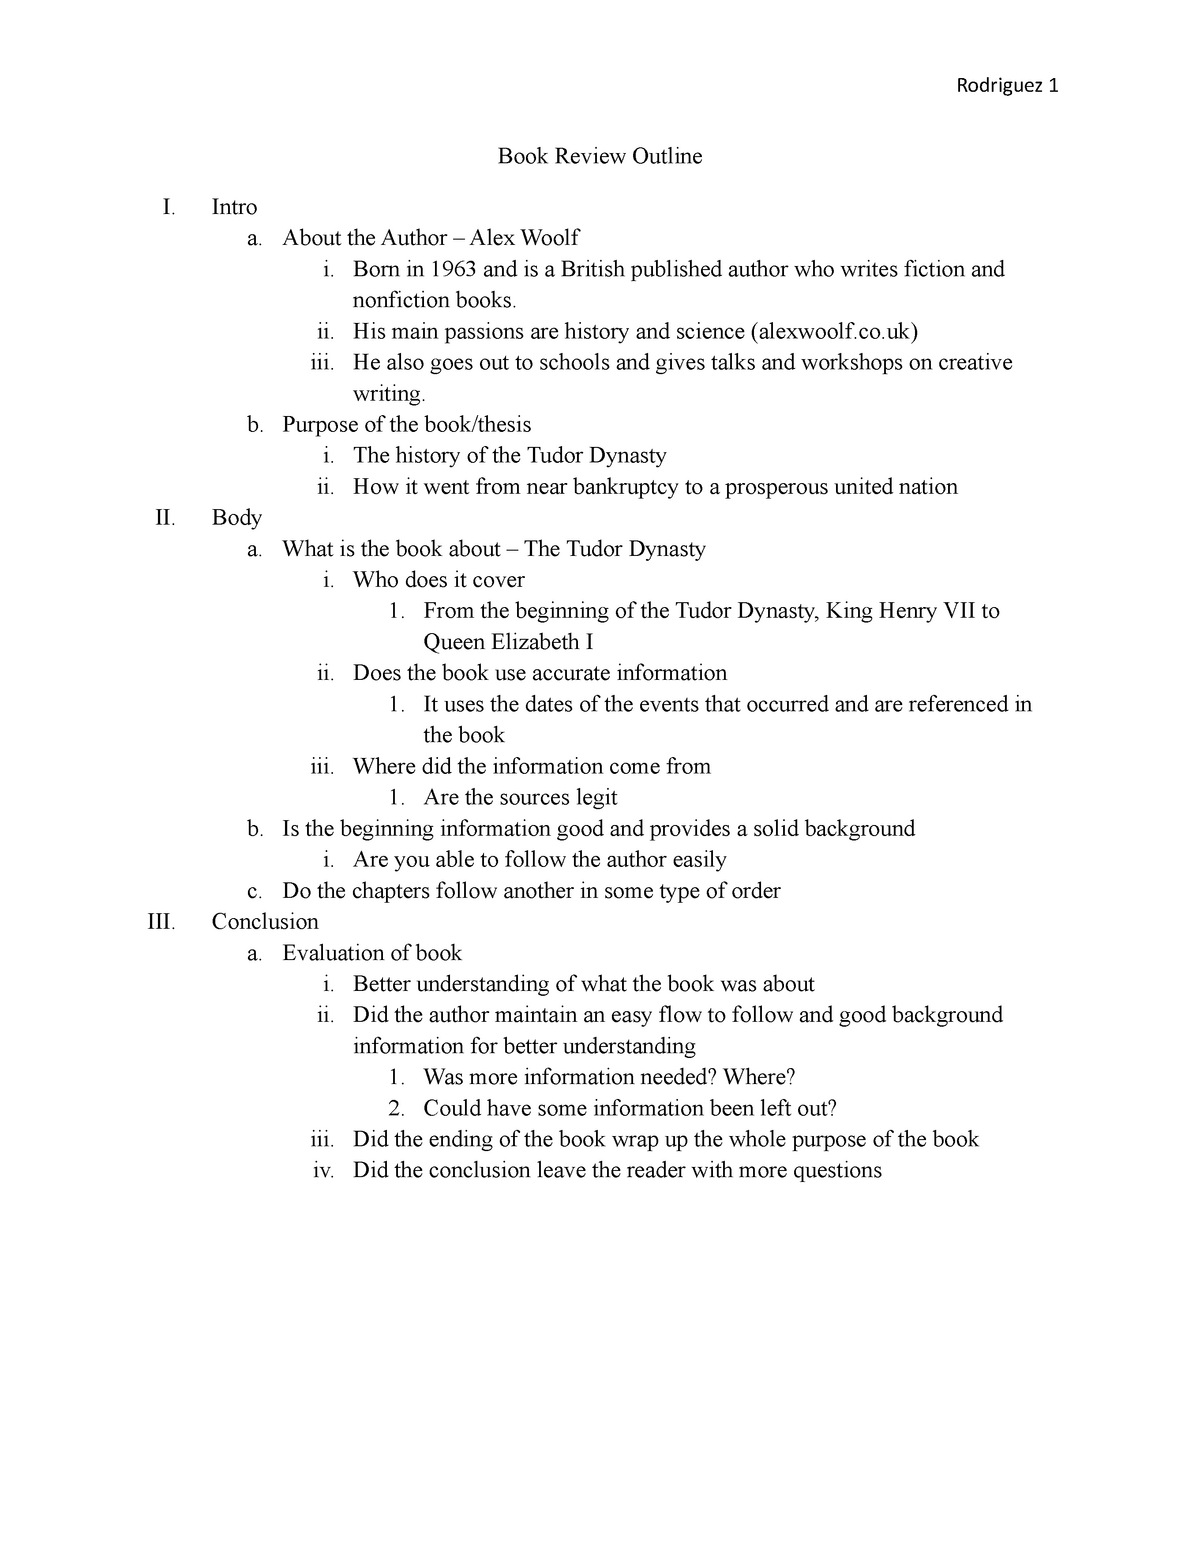 book review outline template